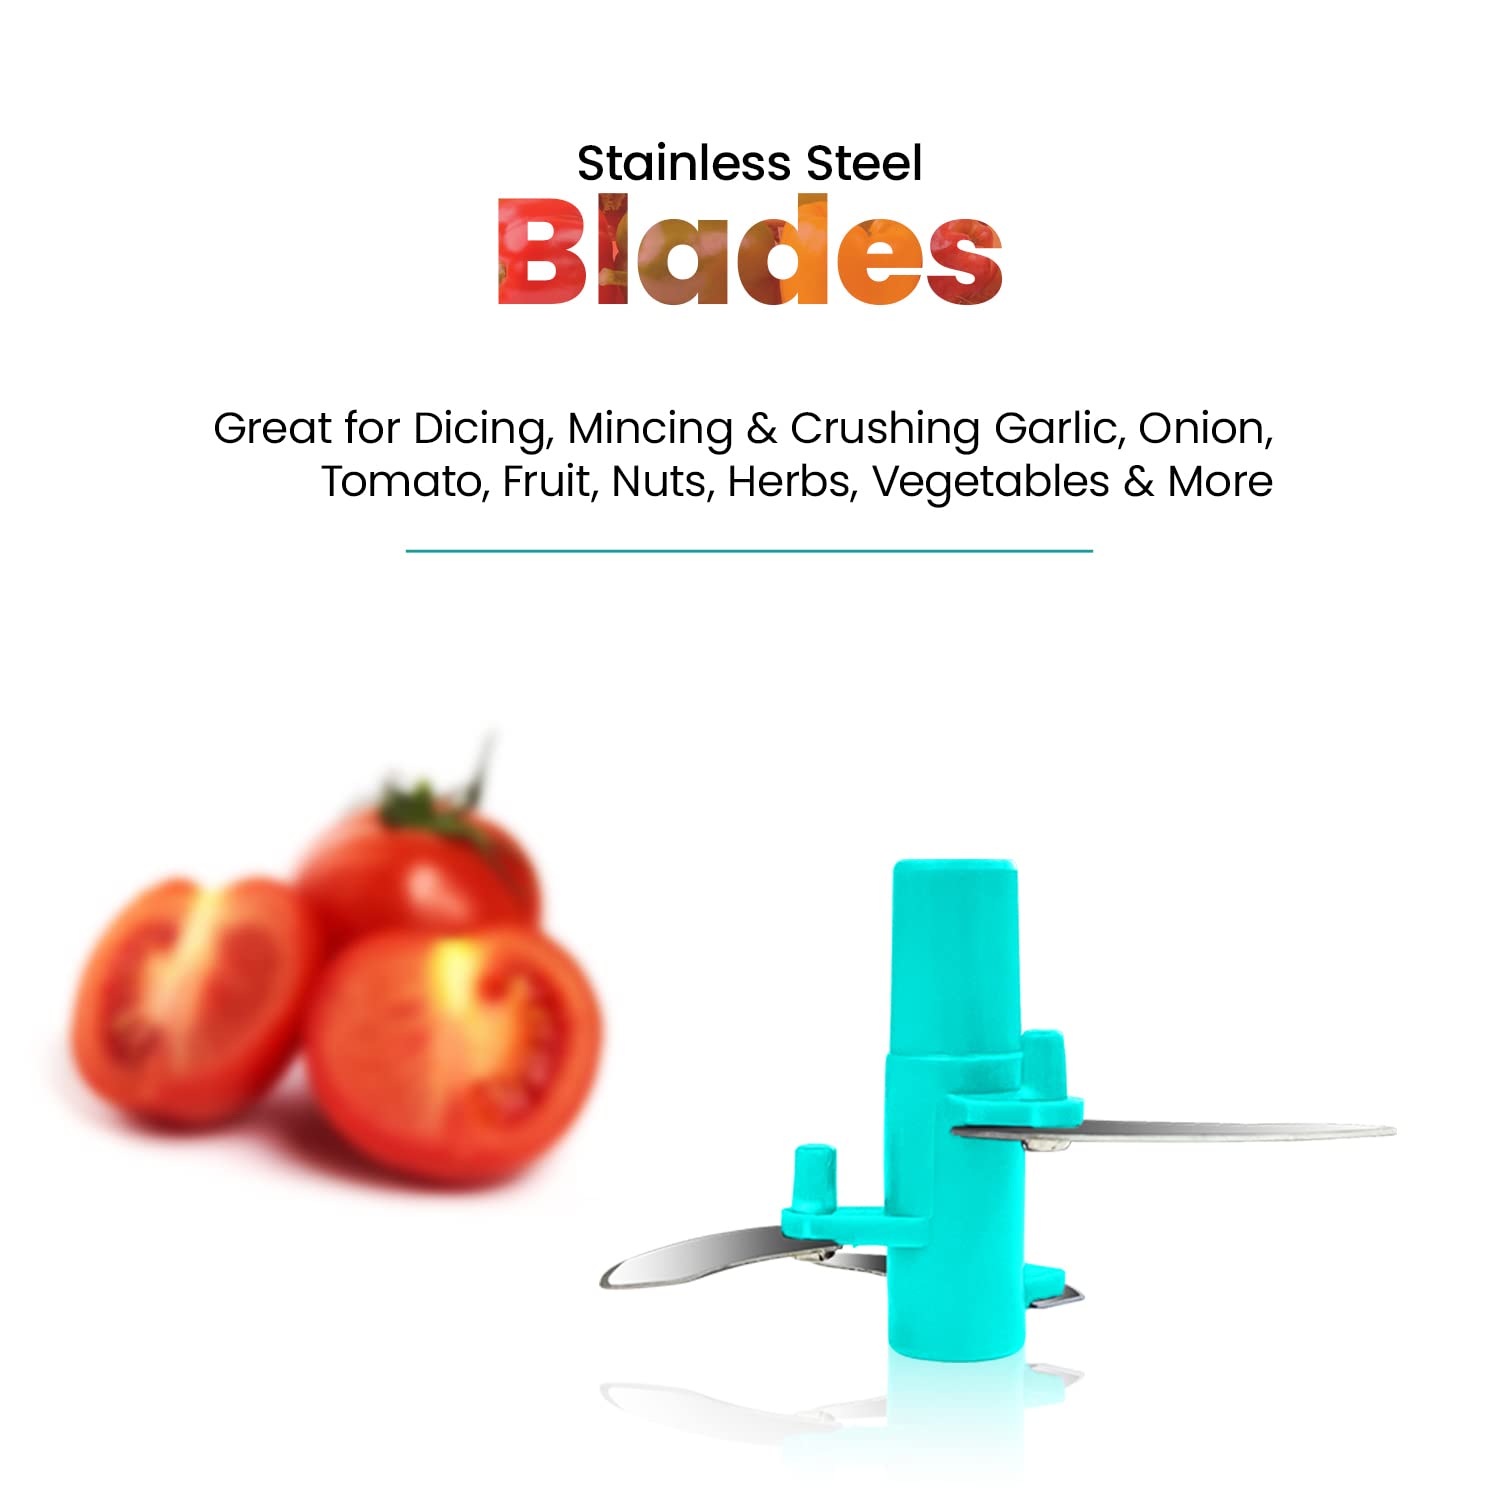 Candes Quick Hand Stainless Steel Blades, Vegetable & Fruits Chopper - Green